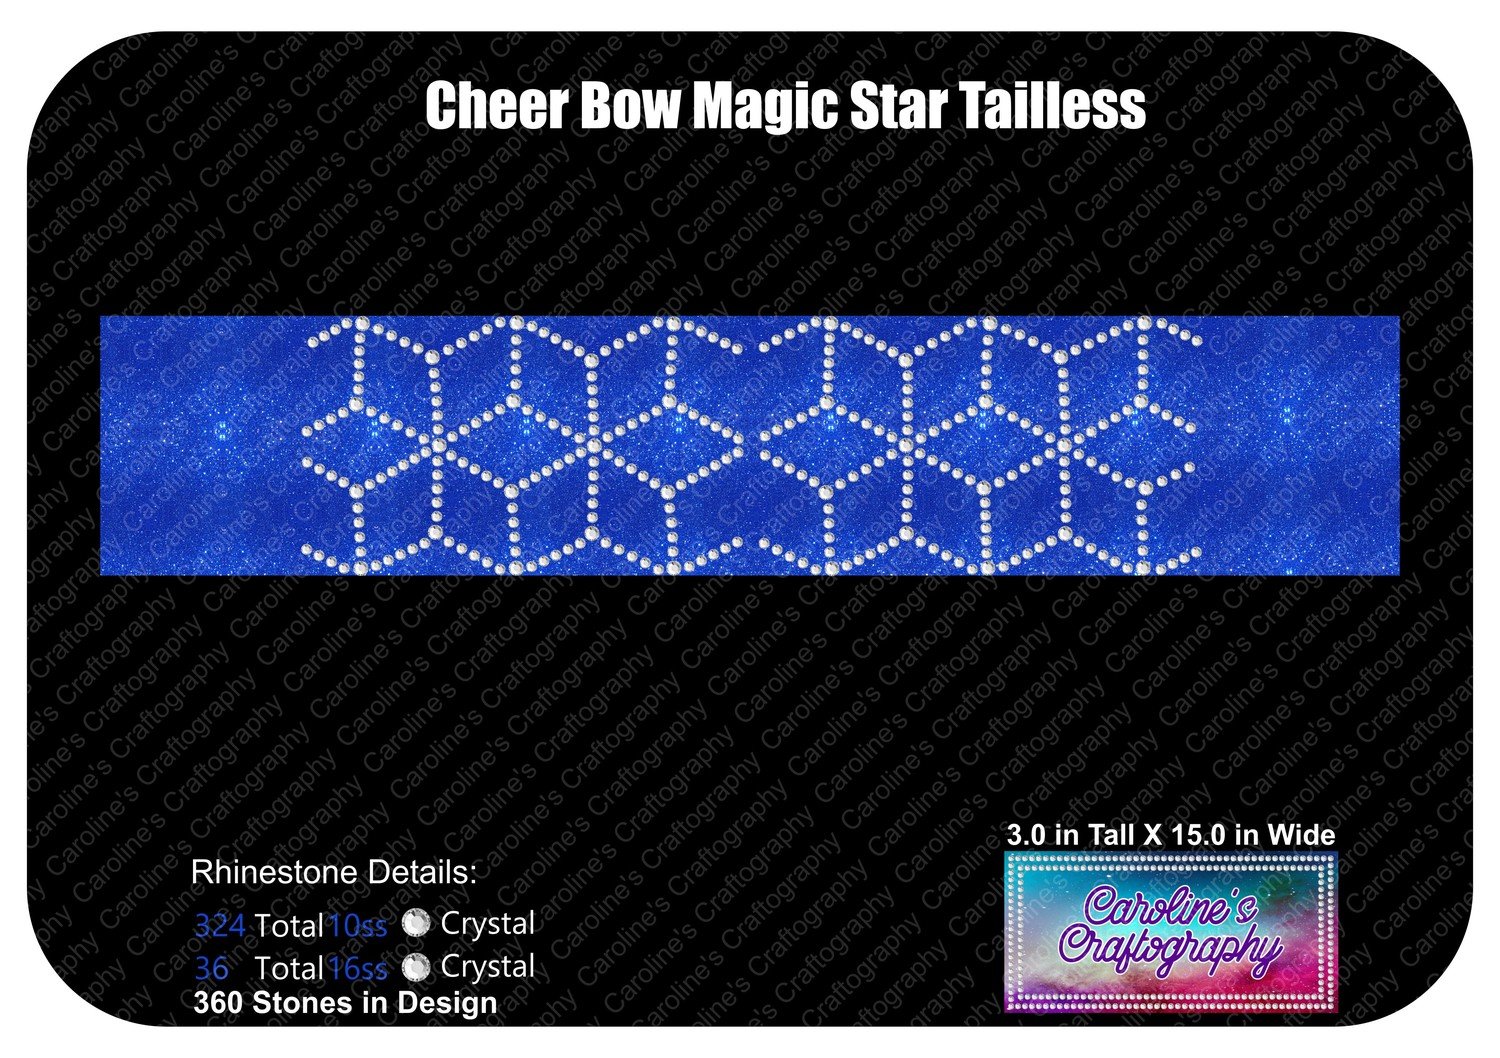 Tailless Cheer Bow Magic Star Stone